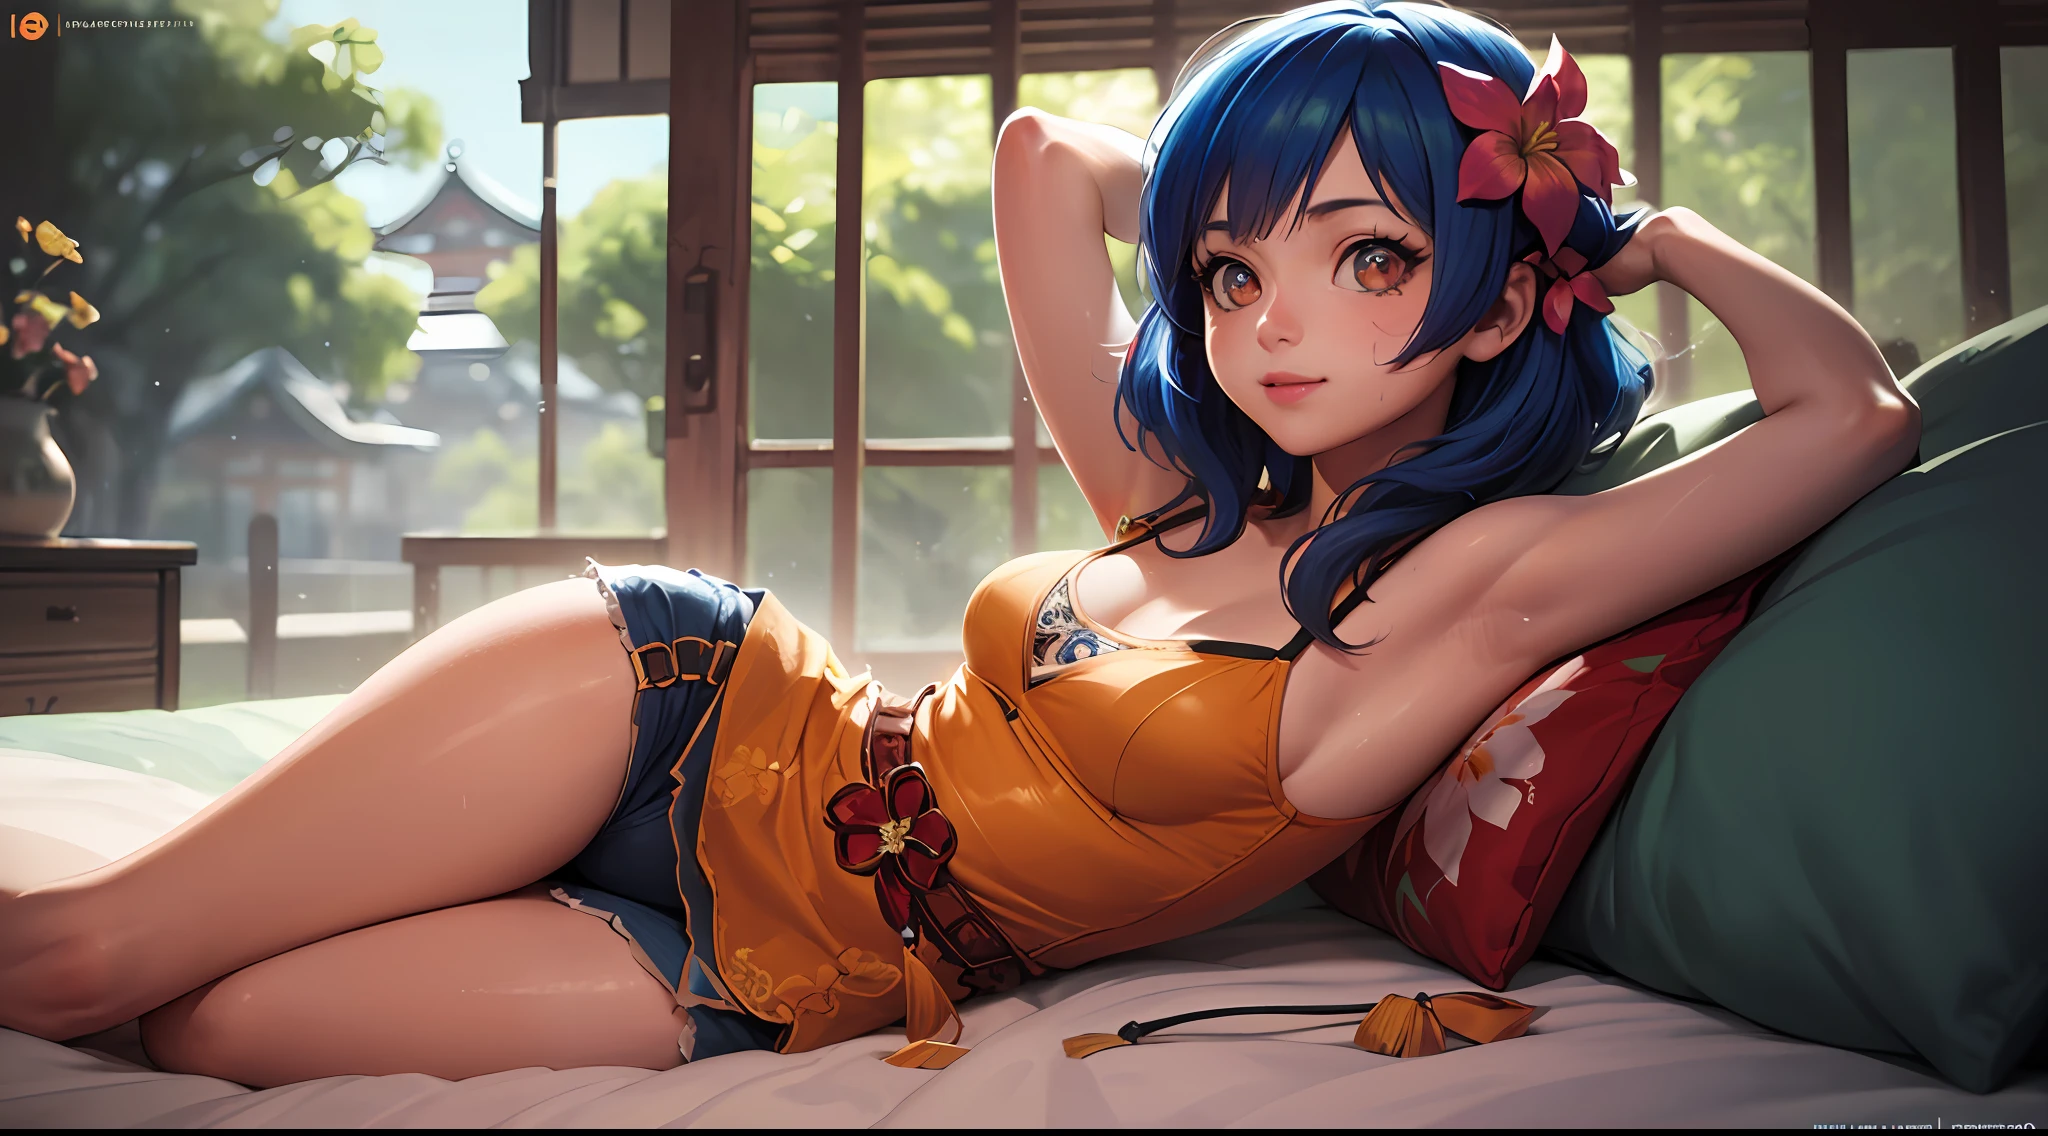 (Ultra Real), (Illustration), (High Resolution), (8K), (Very Detailed), (Best Illustration), (Beautiful Detailed Eyes), (Best Quality), (Ultra Detailed), (Masterpiece), (Nekko Wallpaper), (Detailed Face), Bed, Top Body Up, Short Hair, Blue Hair, Pink Flower, Armpits, Smiles, Lump, Solo, Simple White Top Tank Top Girl, Sweaty, Japan Person, Big,